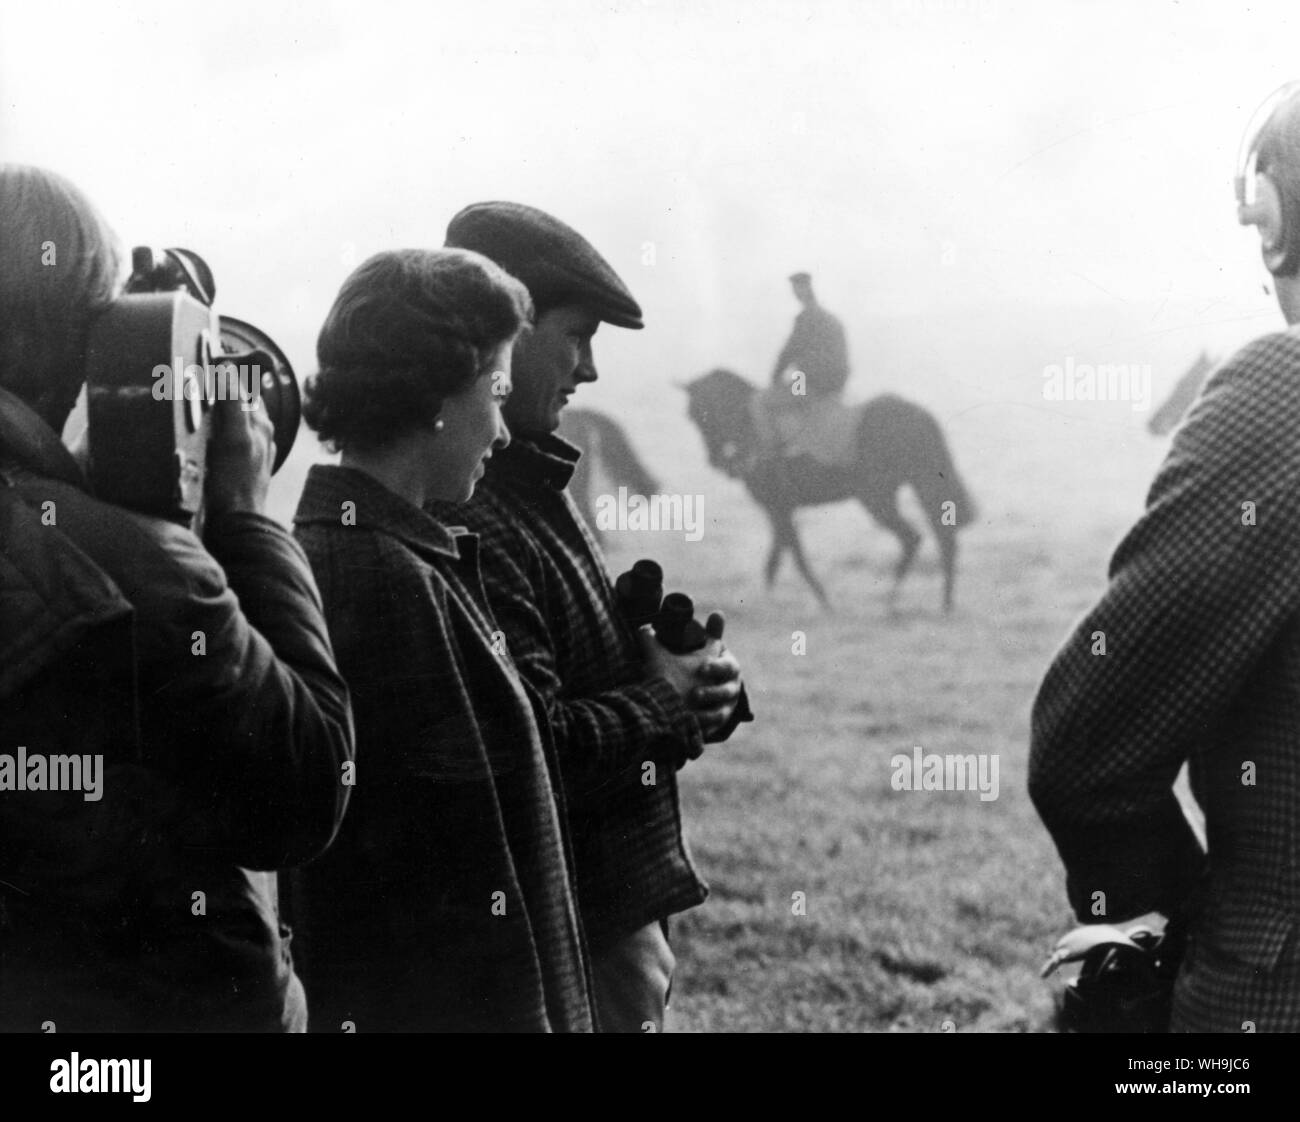 Queen Elizabeth II on the Berkshire Downs with Ian Balding and trainer. 1969 (?) Stock Photo